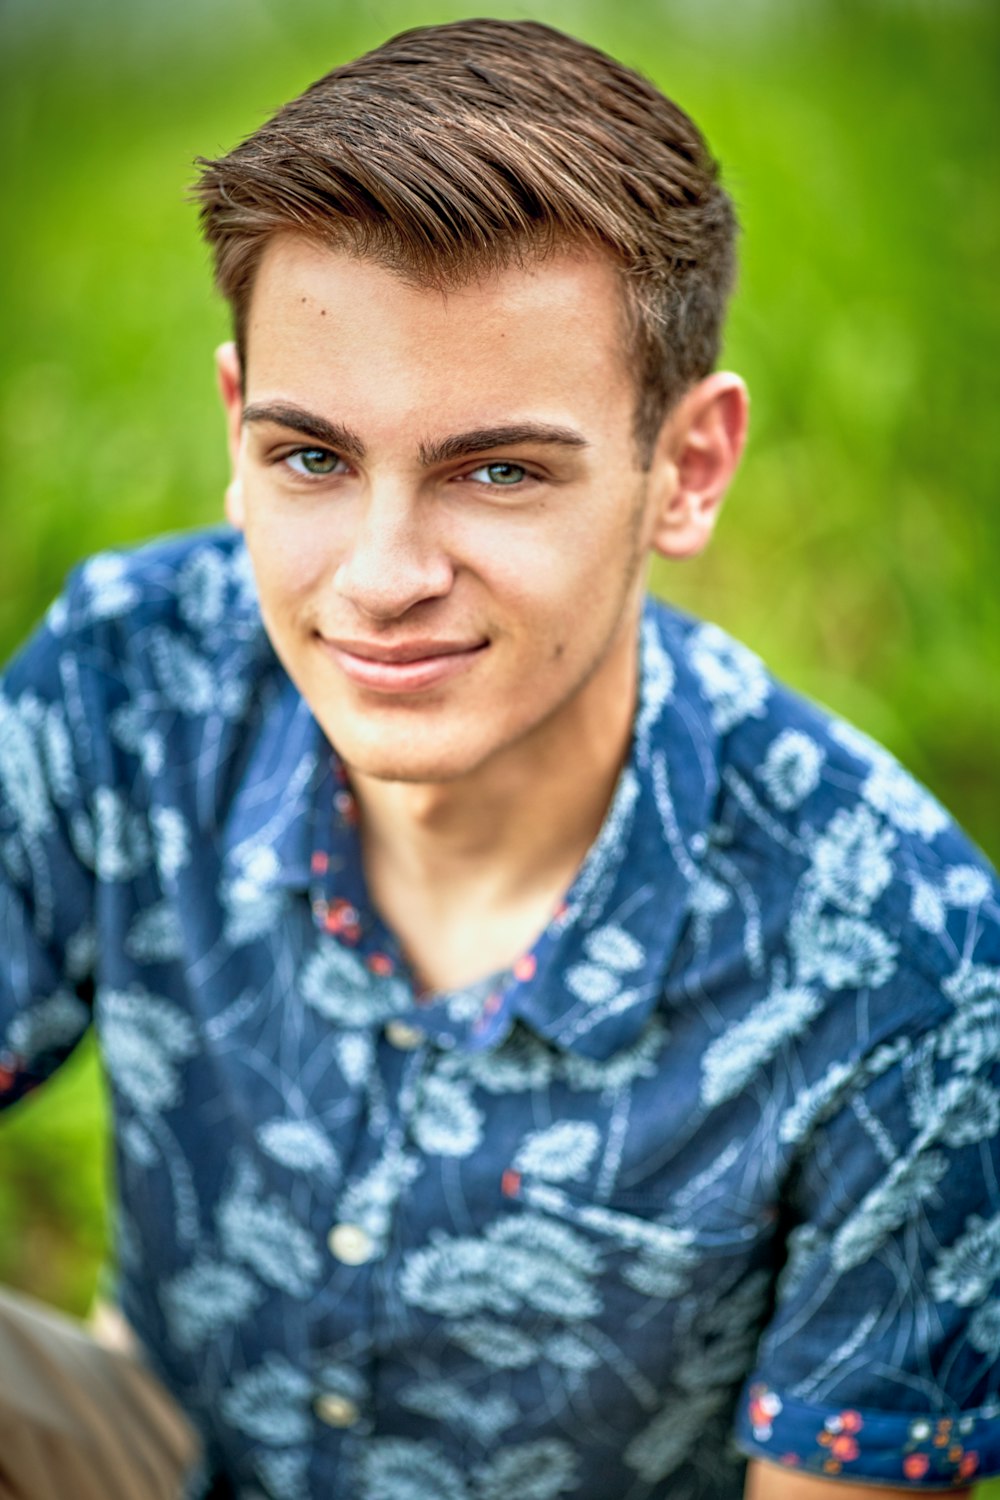 man wearing blue and white floral collared shirt